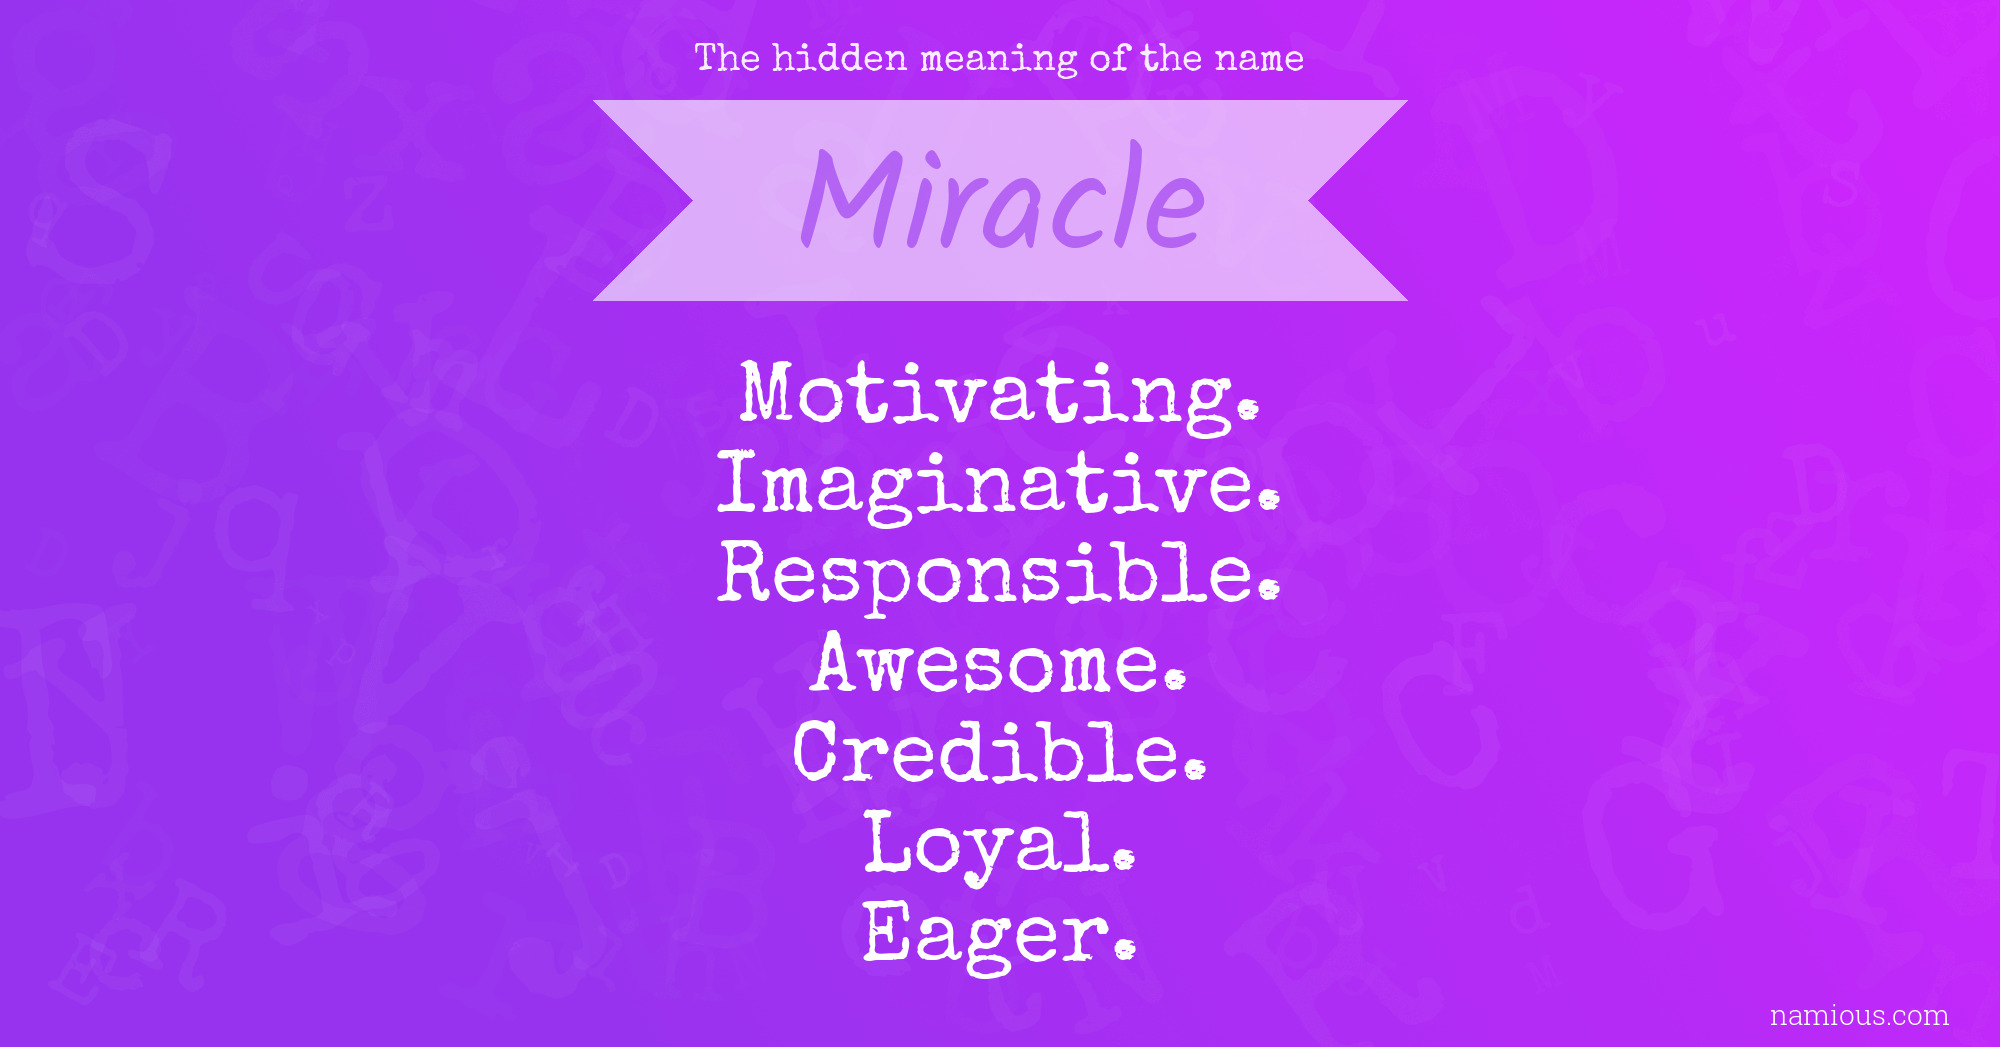 The hidden meaning of the name Miracle